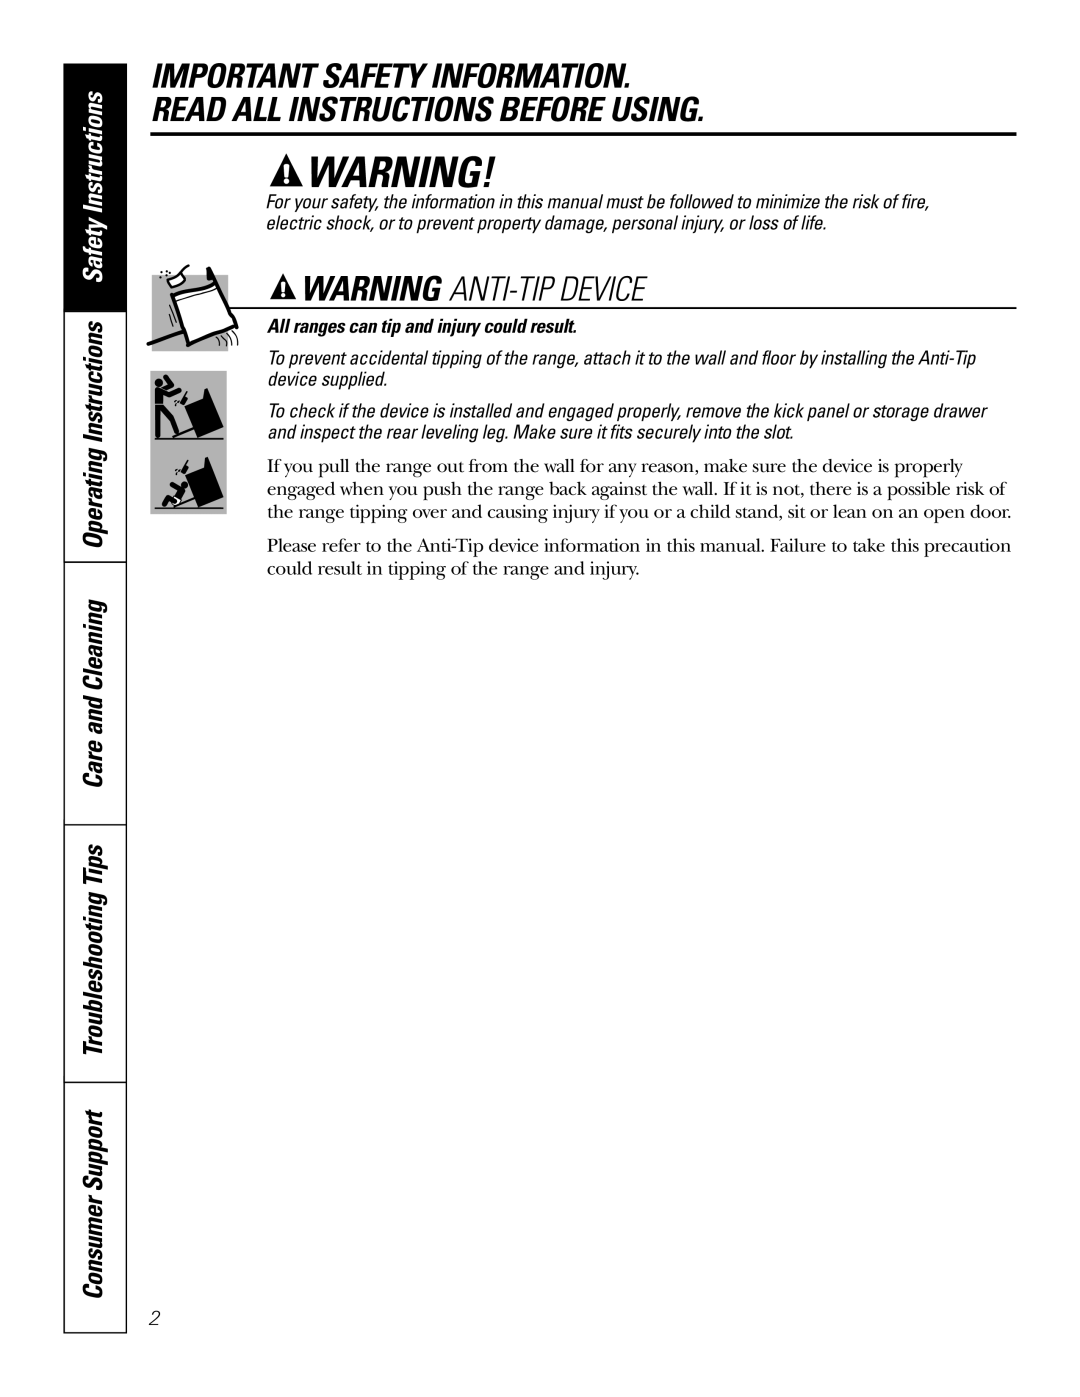 GE JRP80 owner manual Important Safety Information Read All Instructions Before Using, Warning Anti-Tip Device 